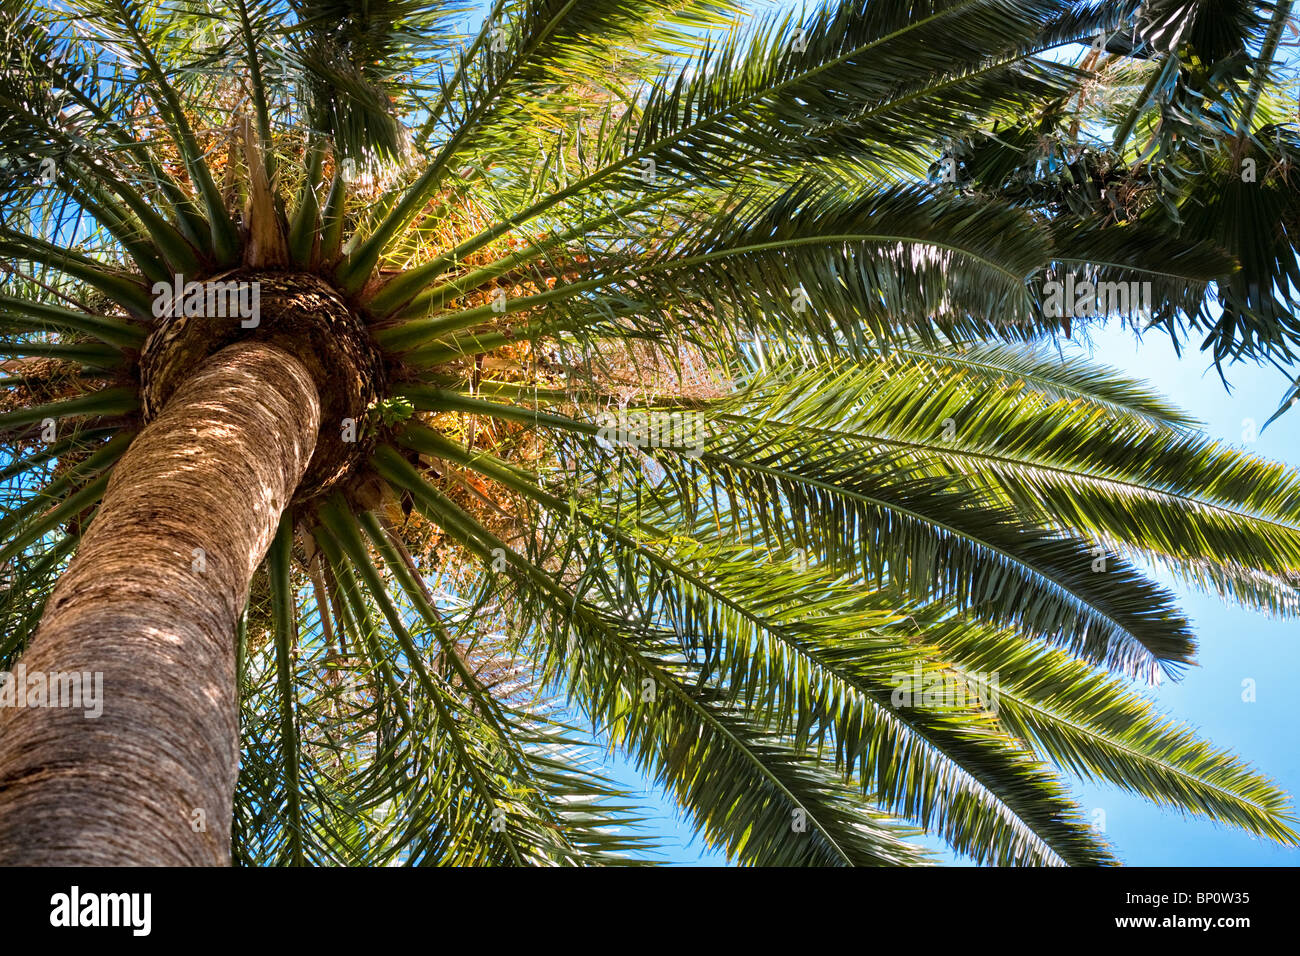 Palmara Canaria High Resolution Stock Photography and Images - Alamy